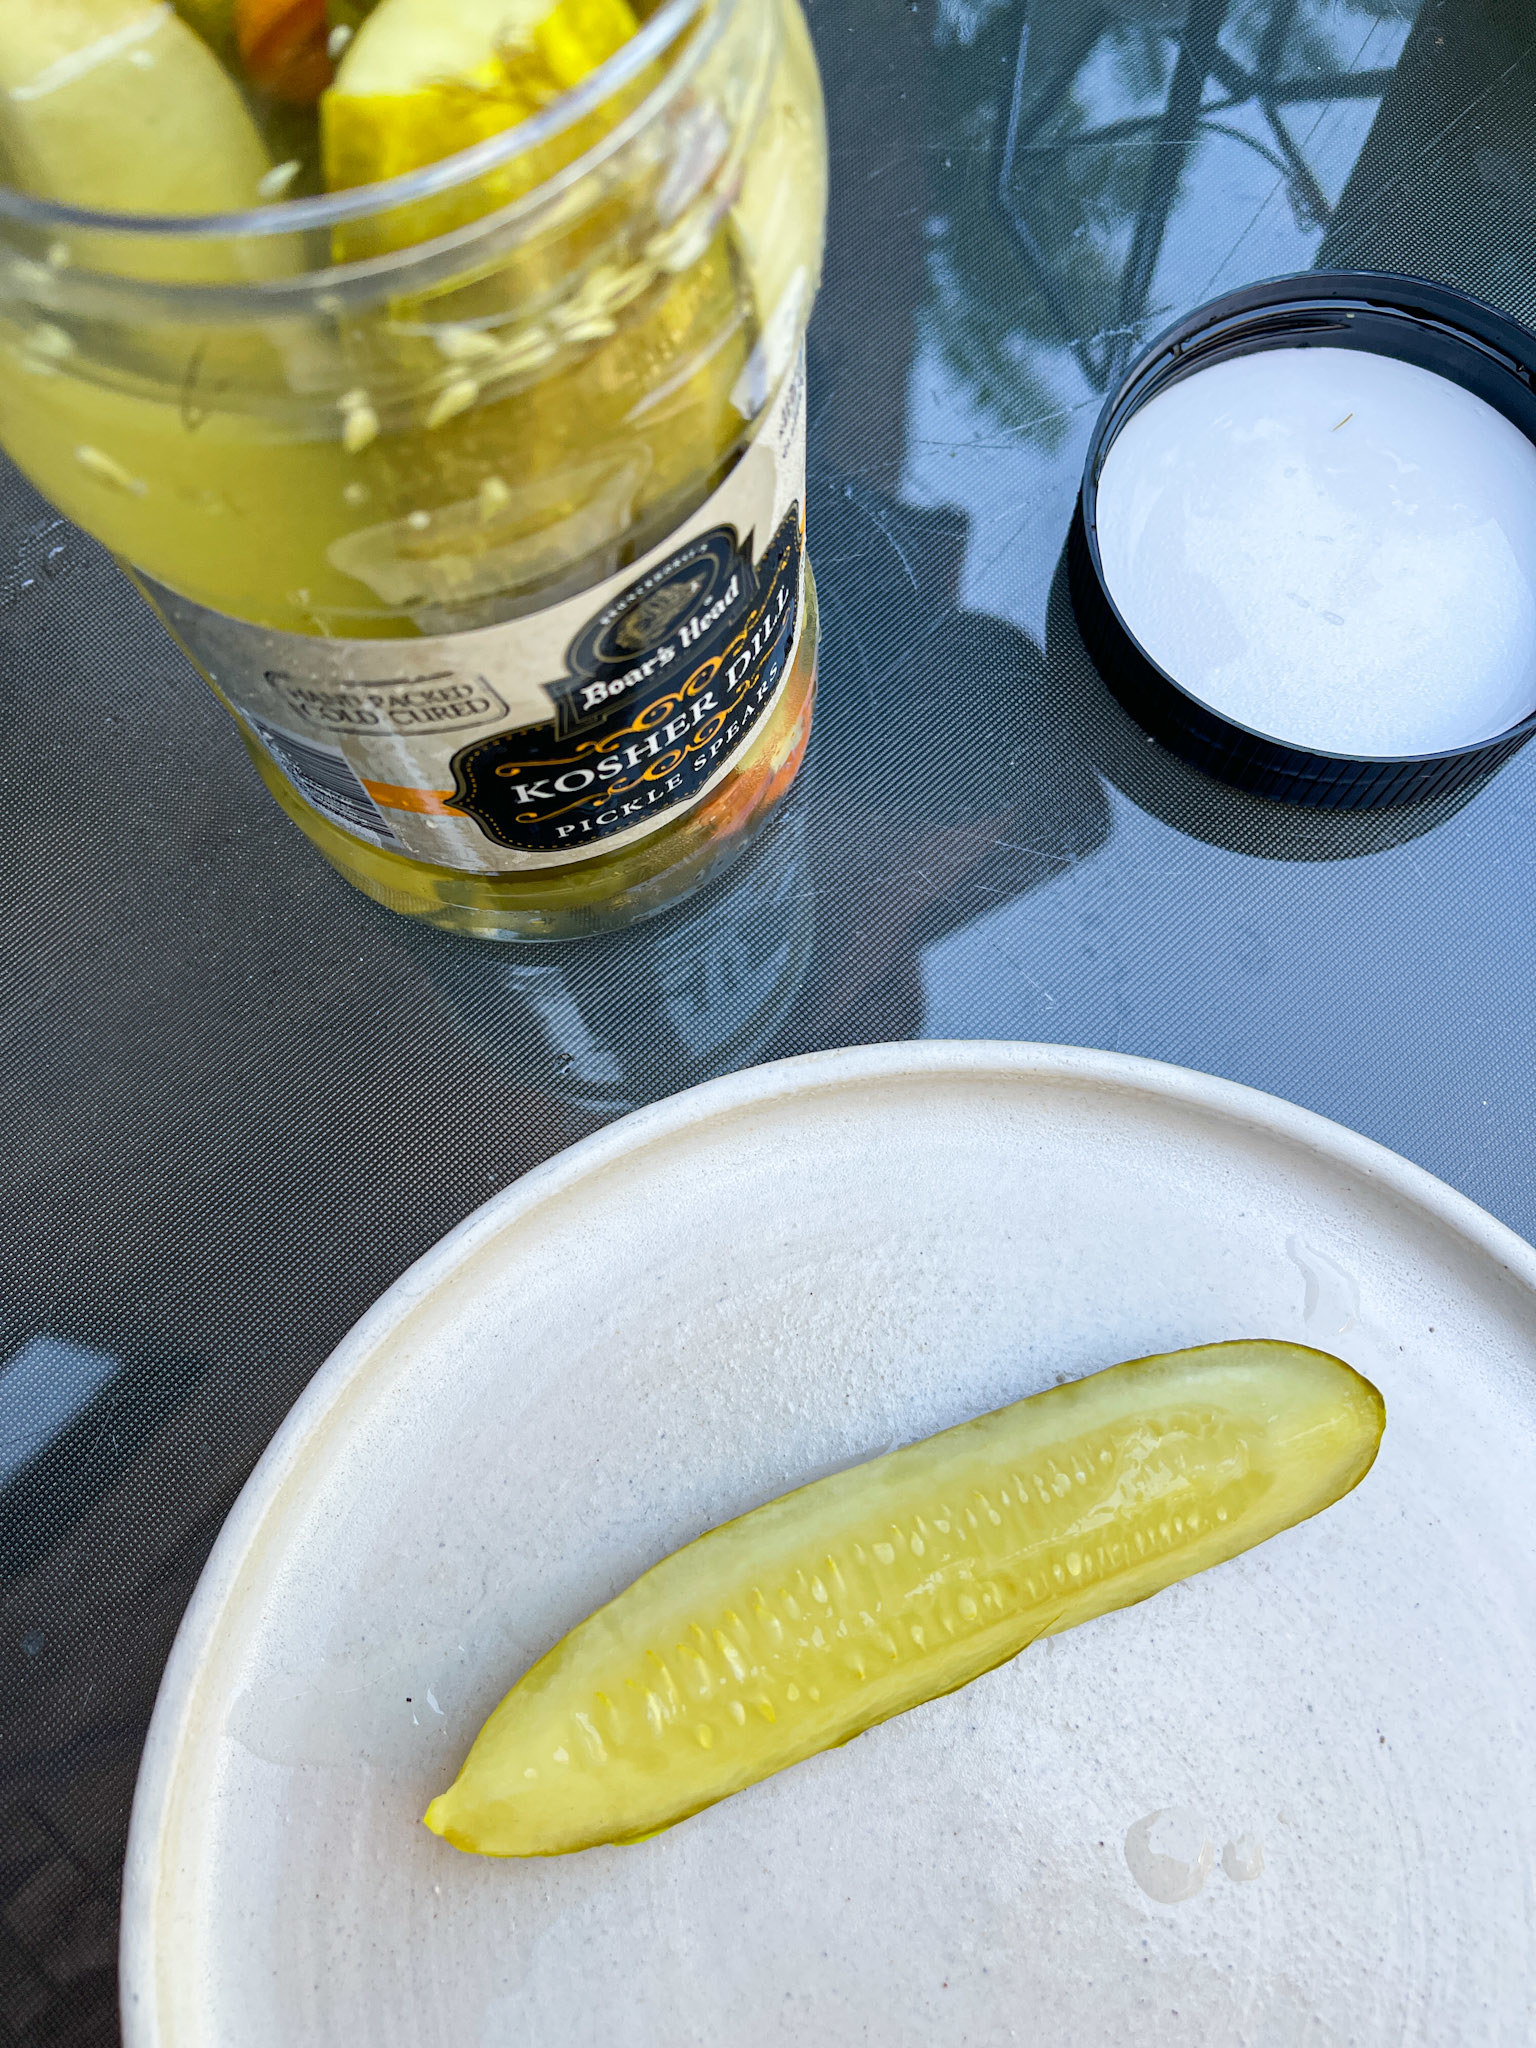 Most notably, the flavor they pack into these pickles is pretty remarkable....